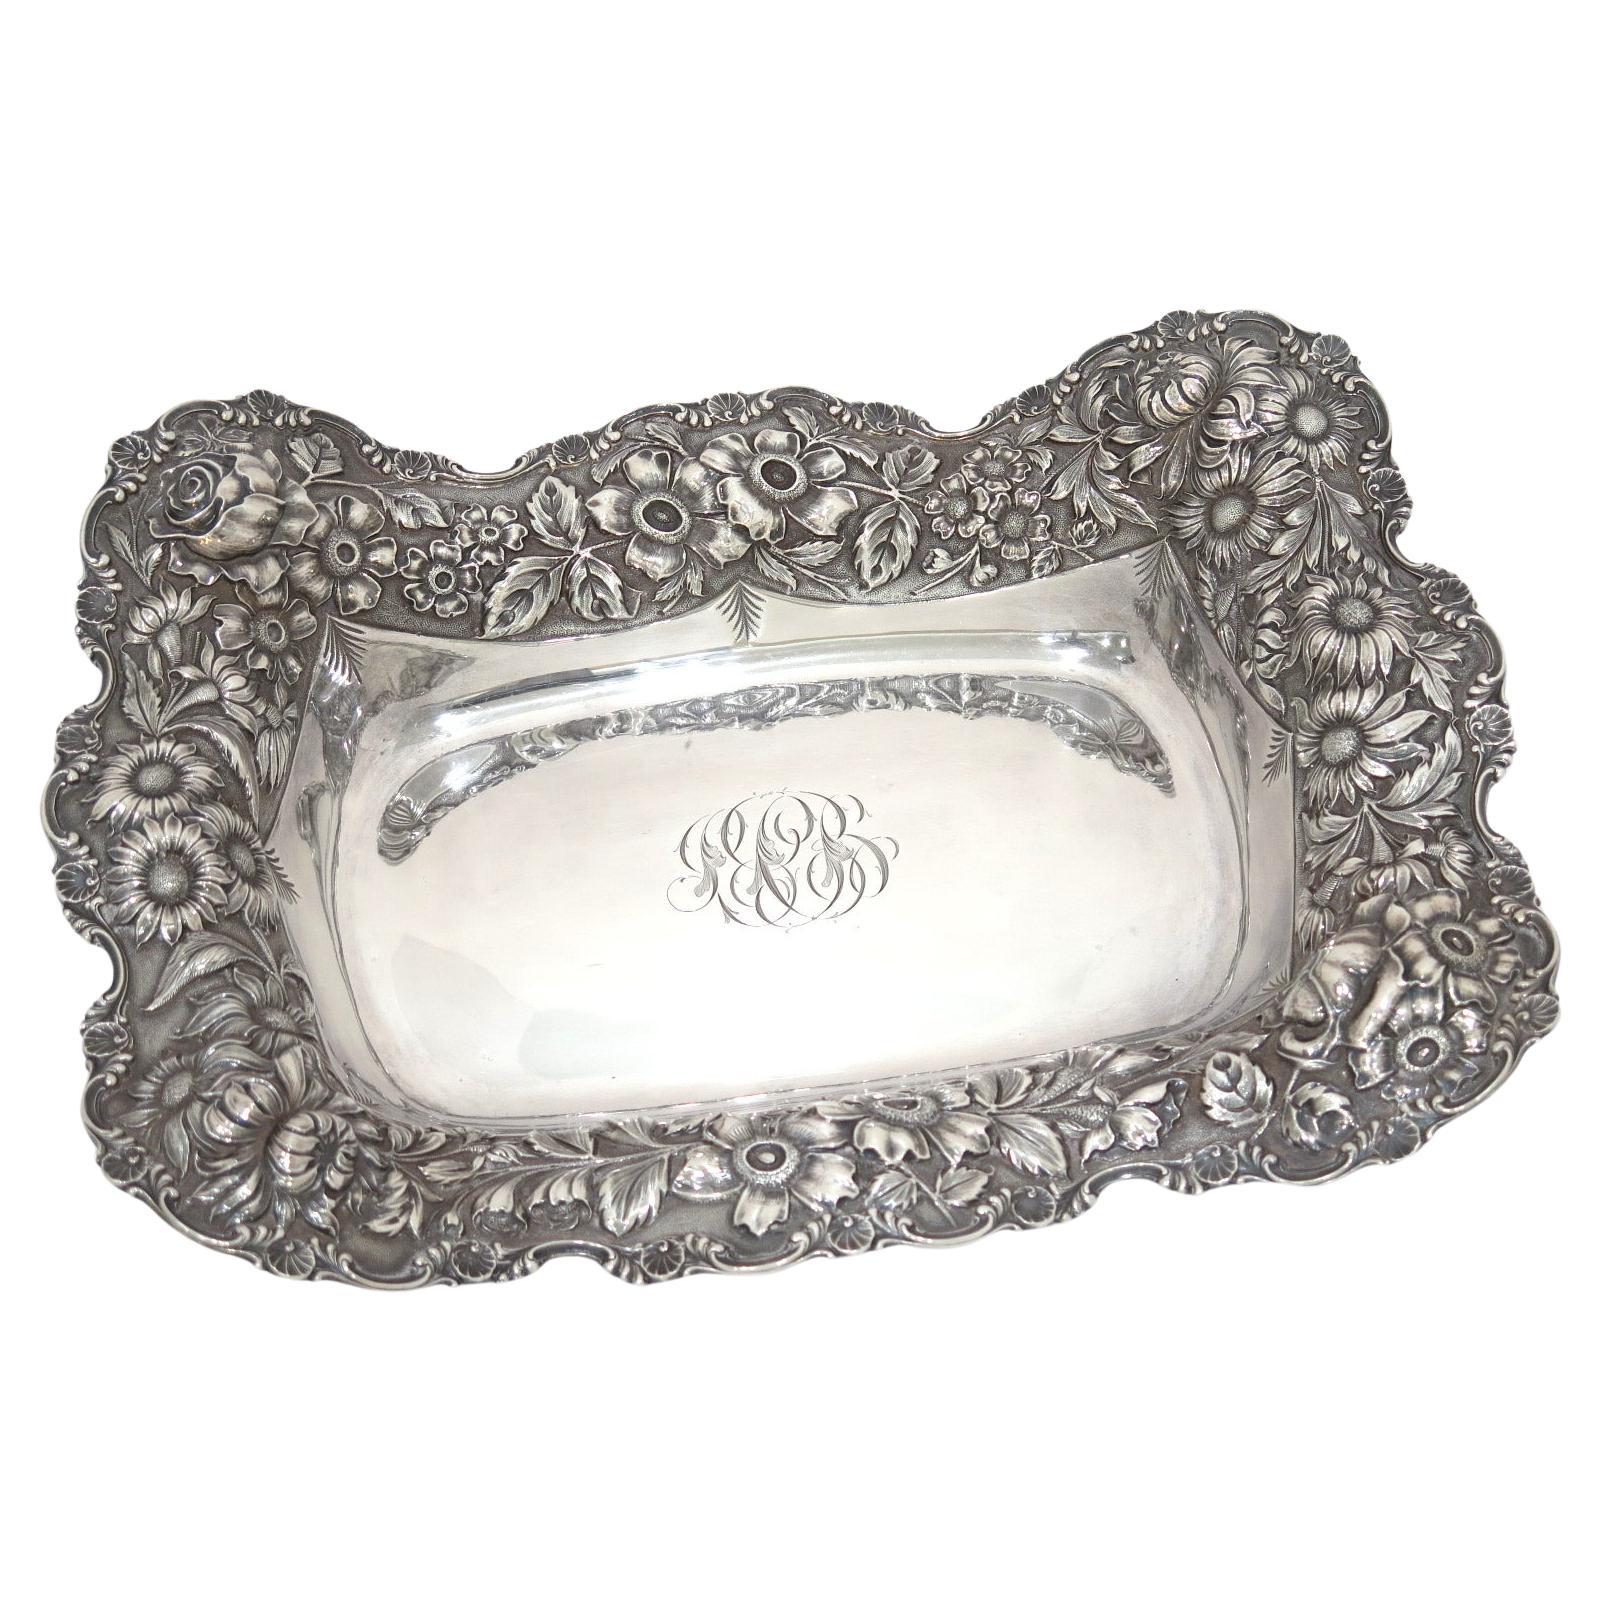 13.25 in - Sterling Silver Stieff Antique 1904-1909 Floral Repousse Serving Bol